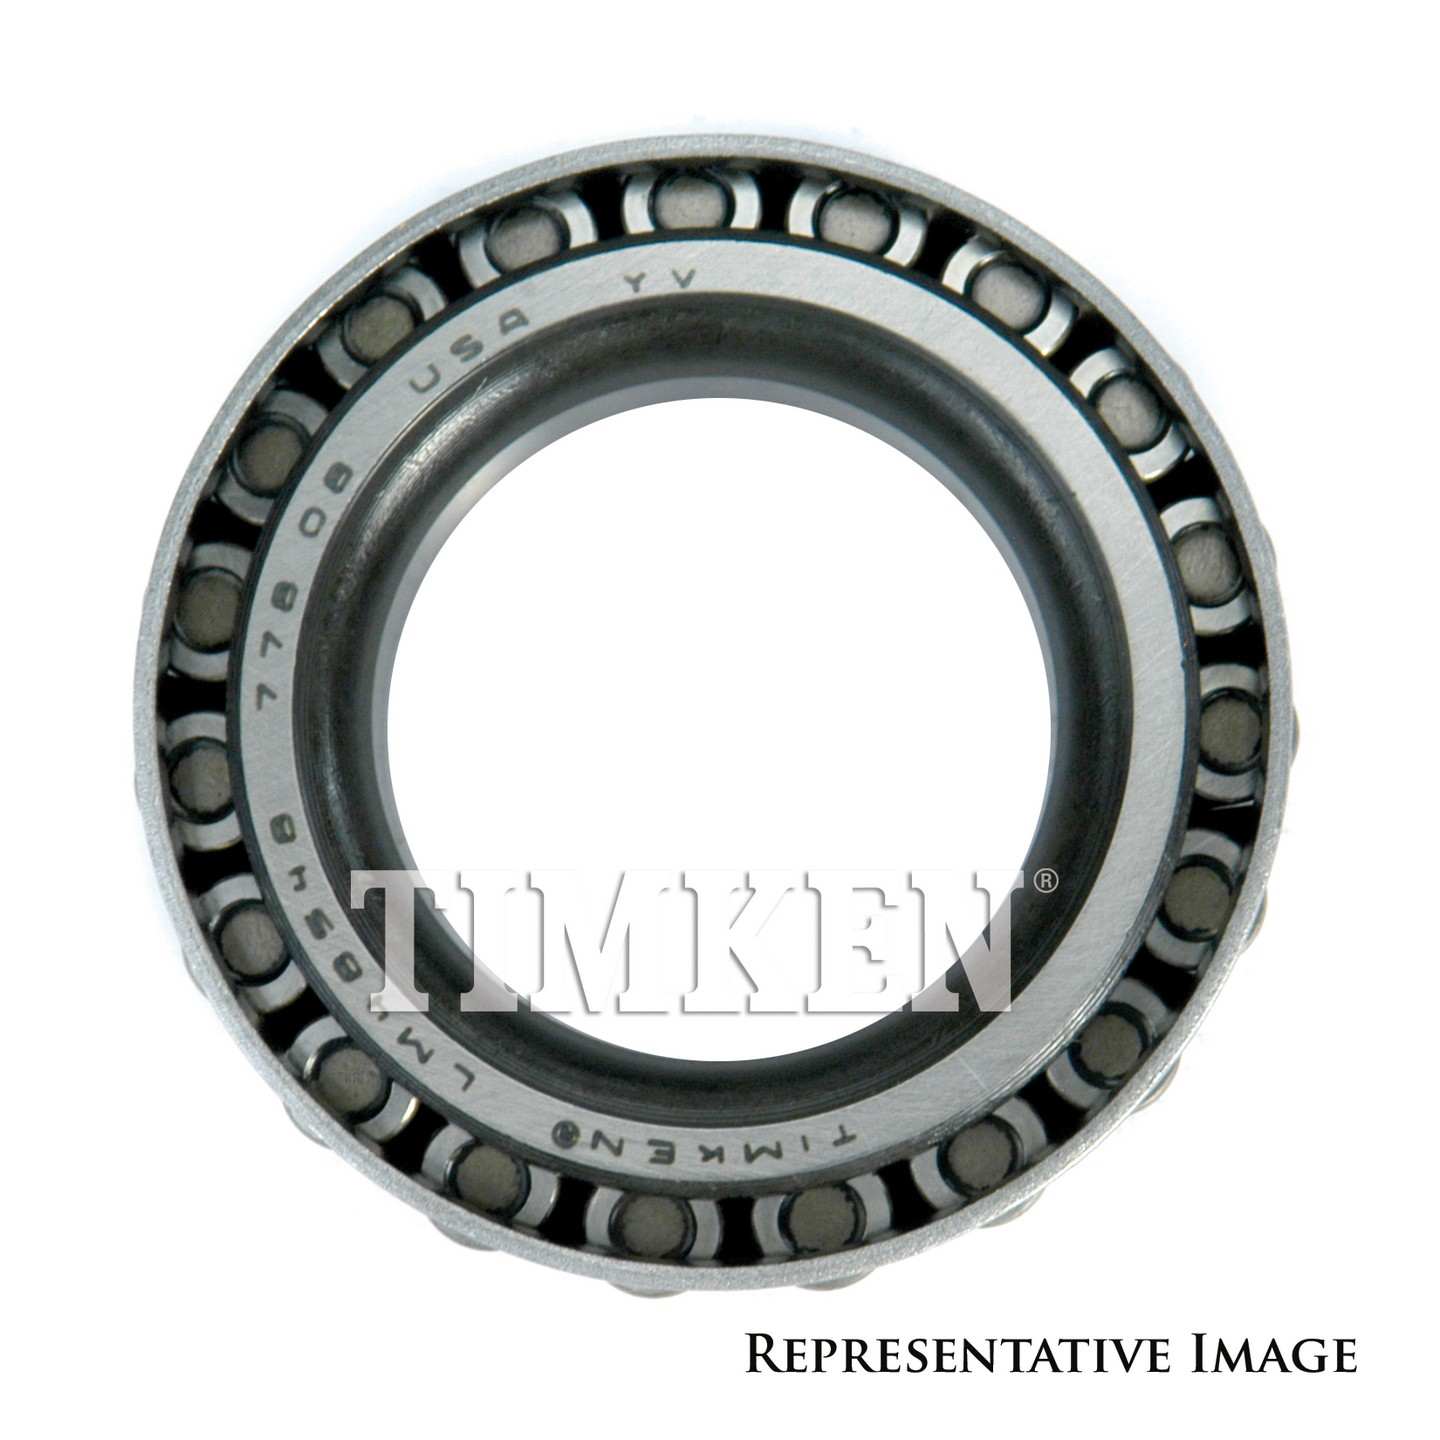 Back View of Automatic Transmission Transfer Shaft Bearing TIMKEN M802048CP